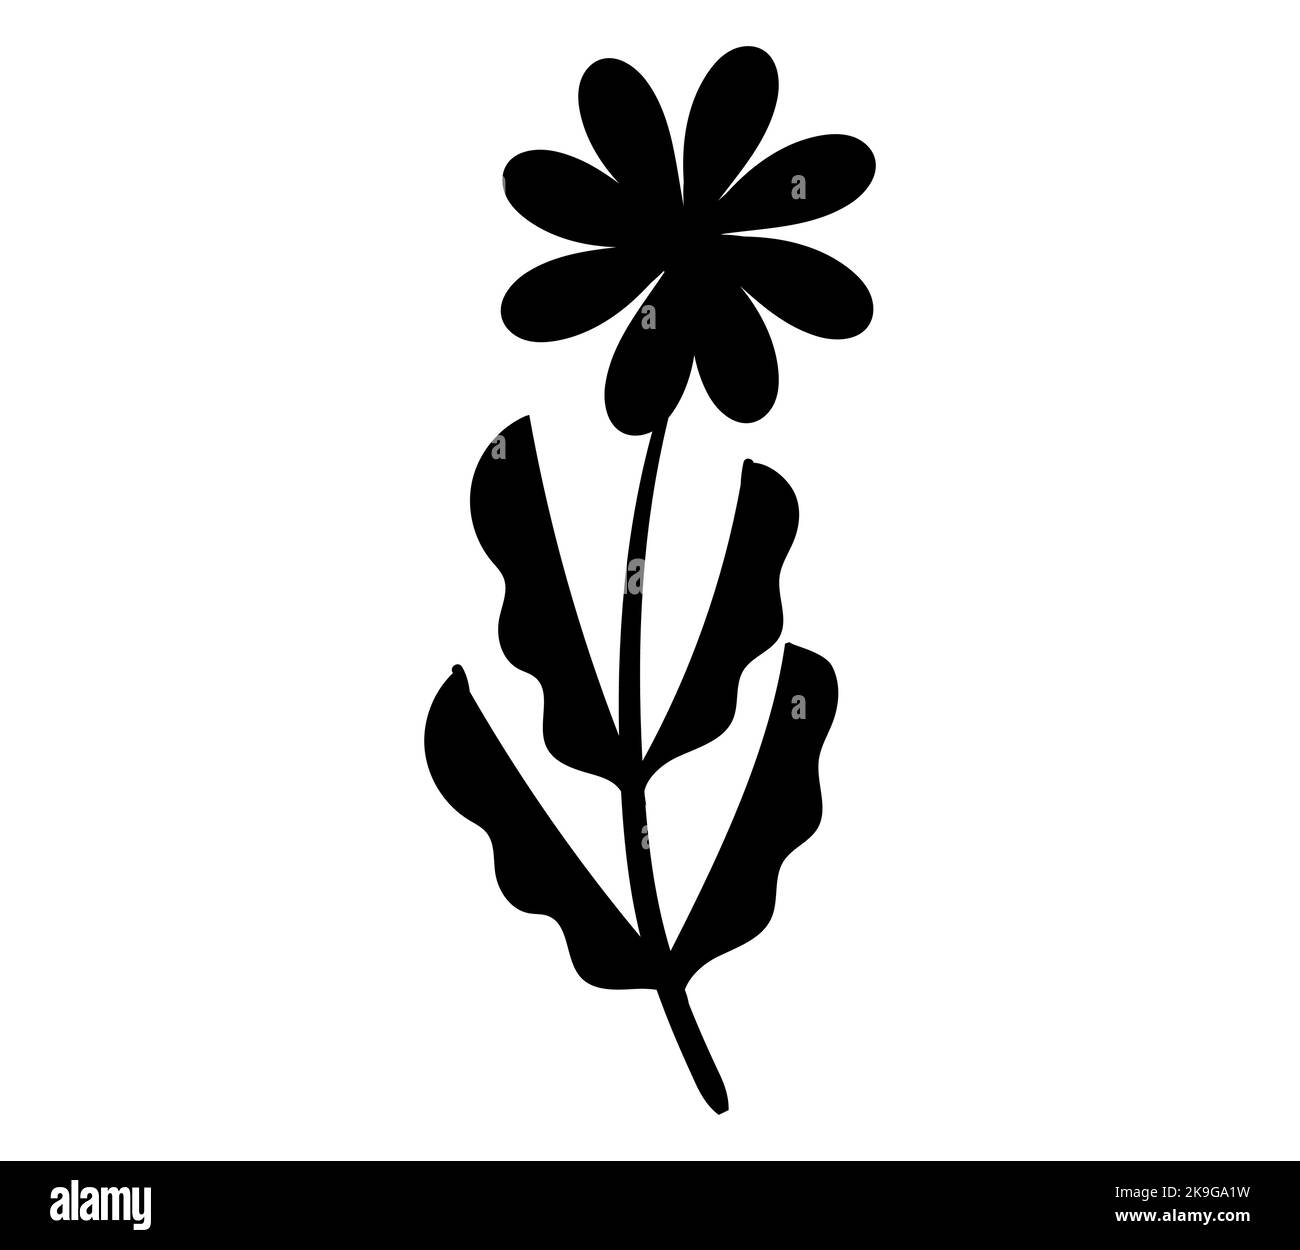 Vector black silhouettes of flowers isolated on a white background. Stock Vector